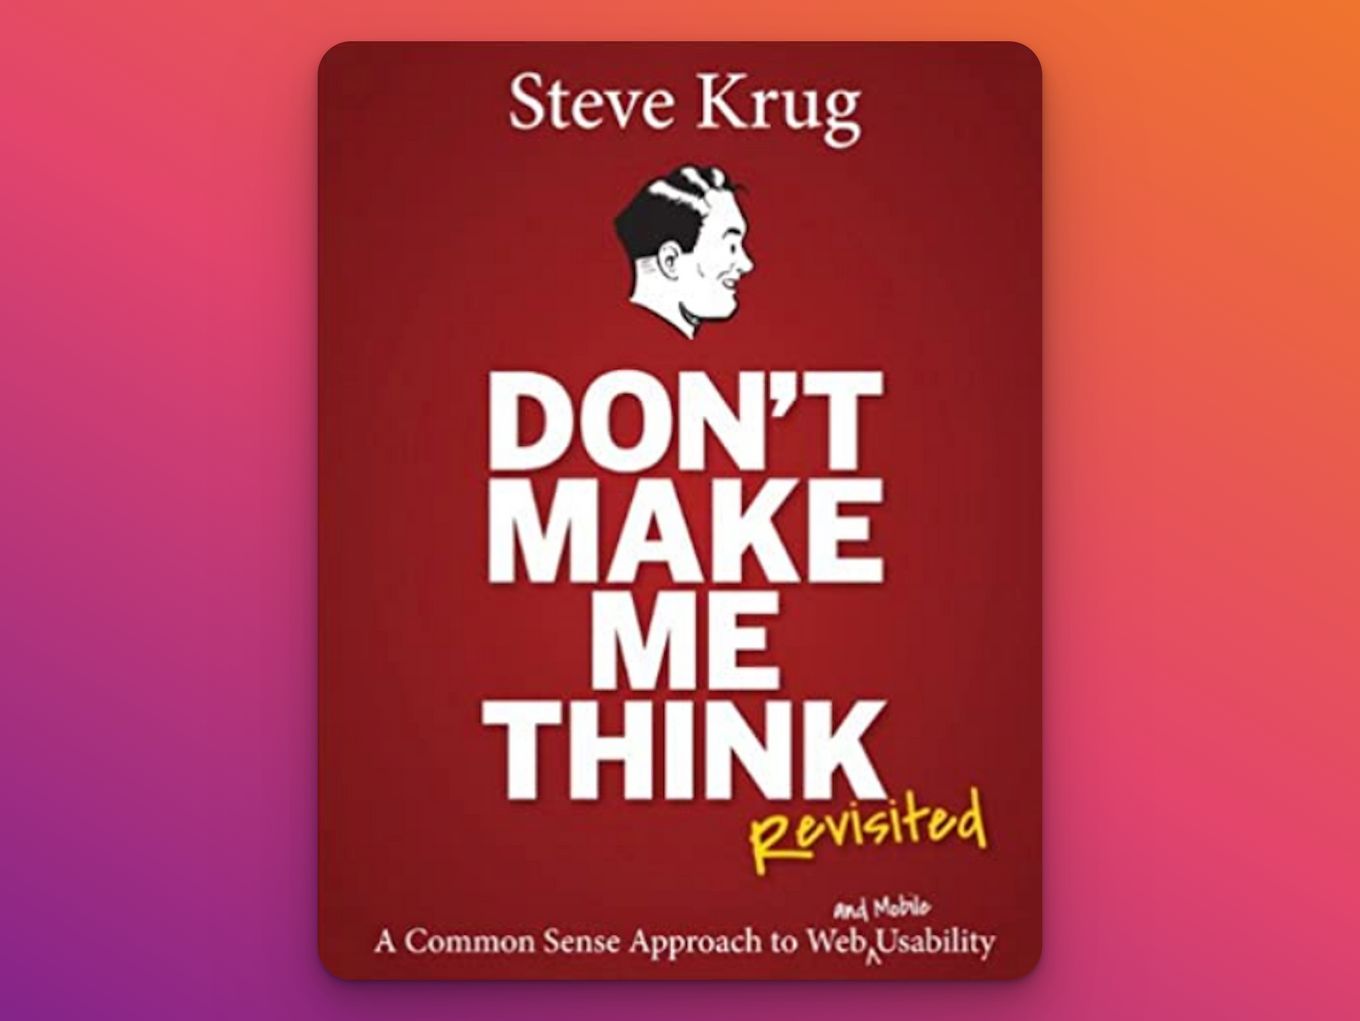 Don’t Make Me Think, from Steve Rug